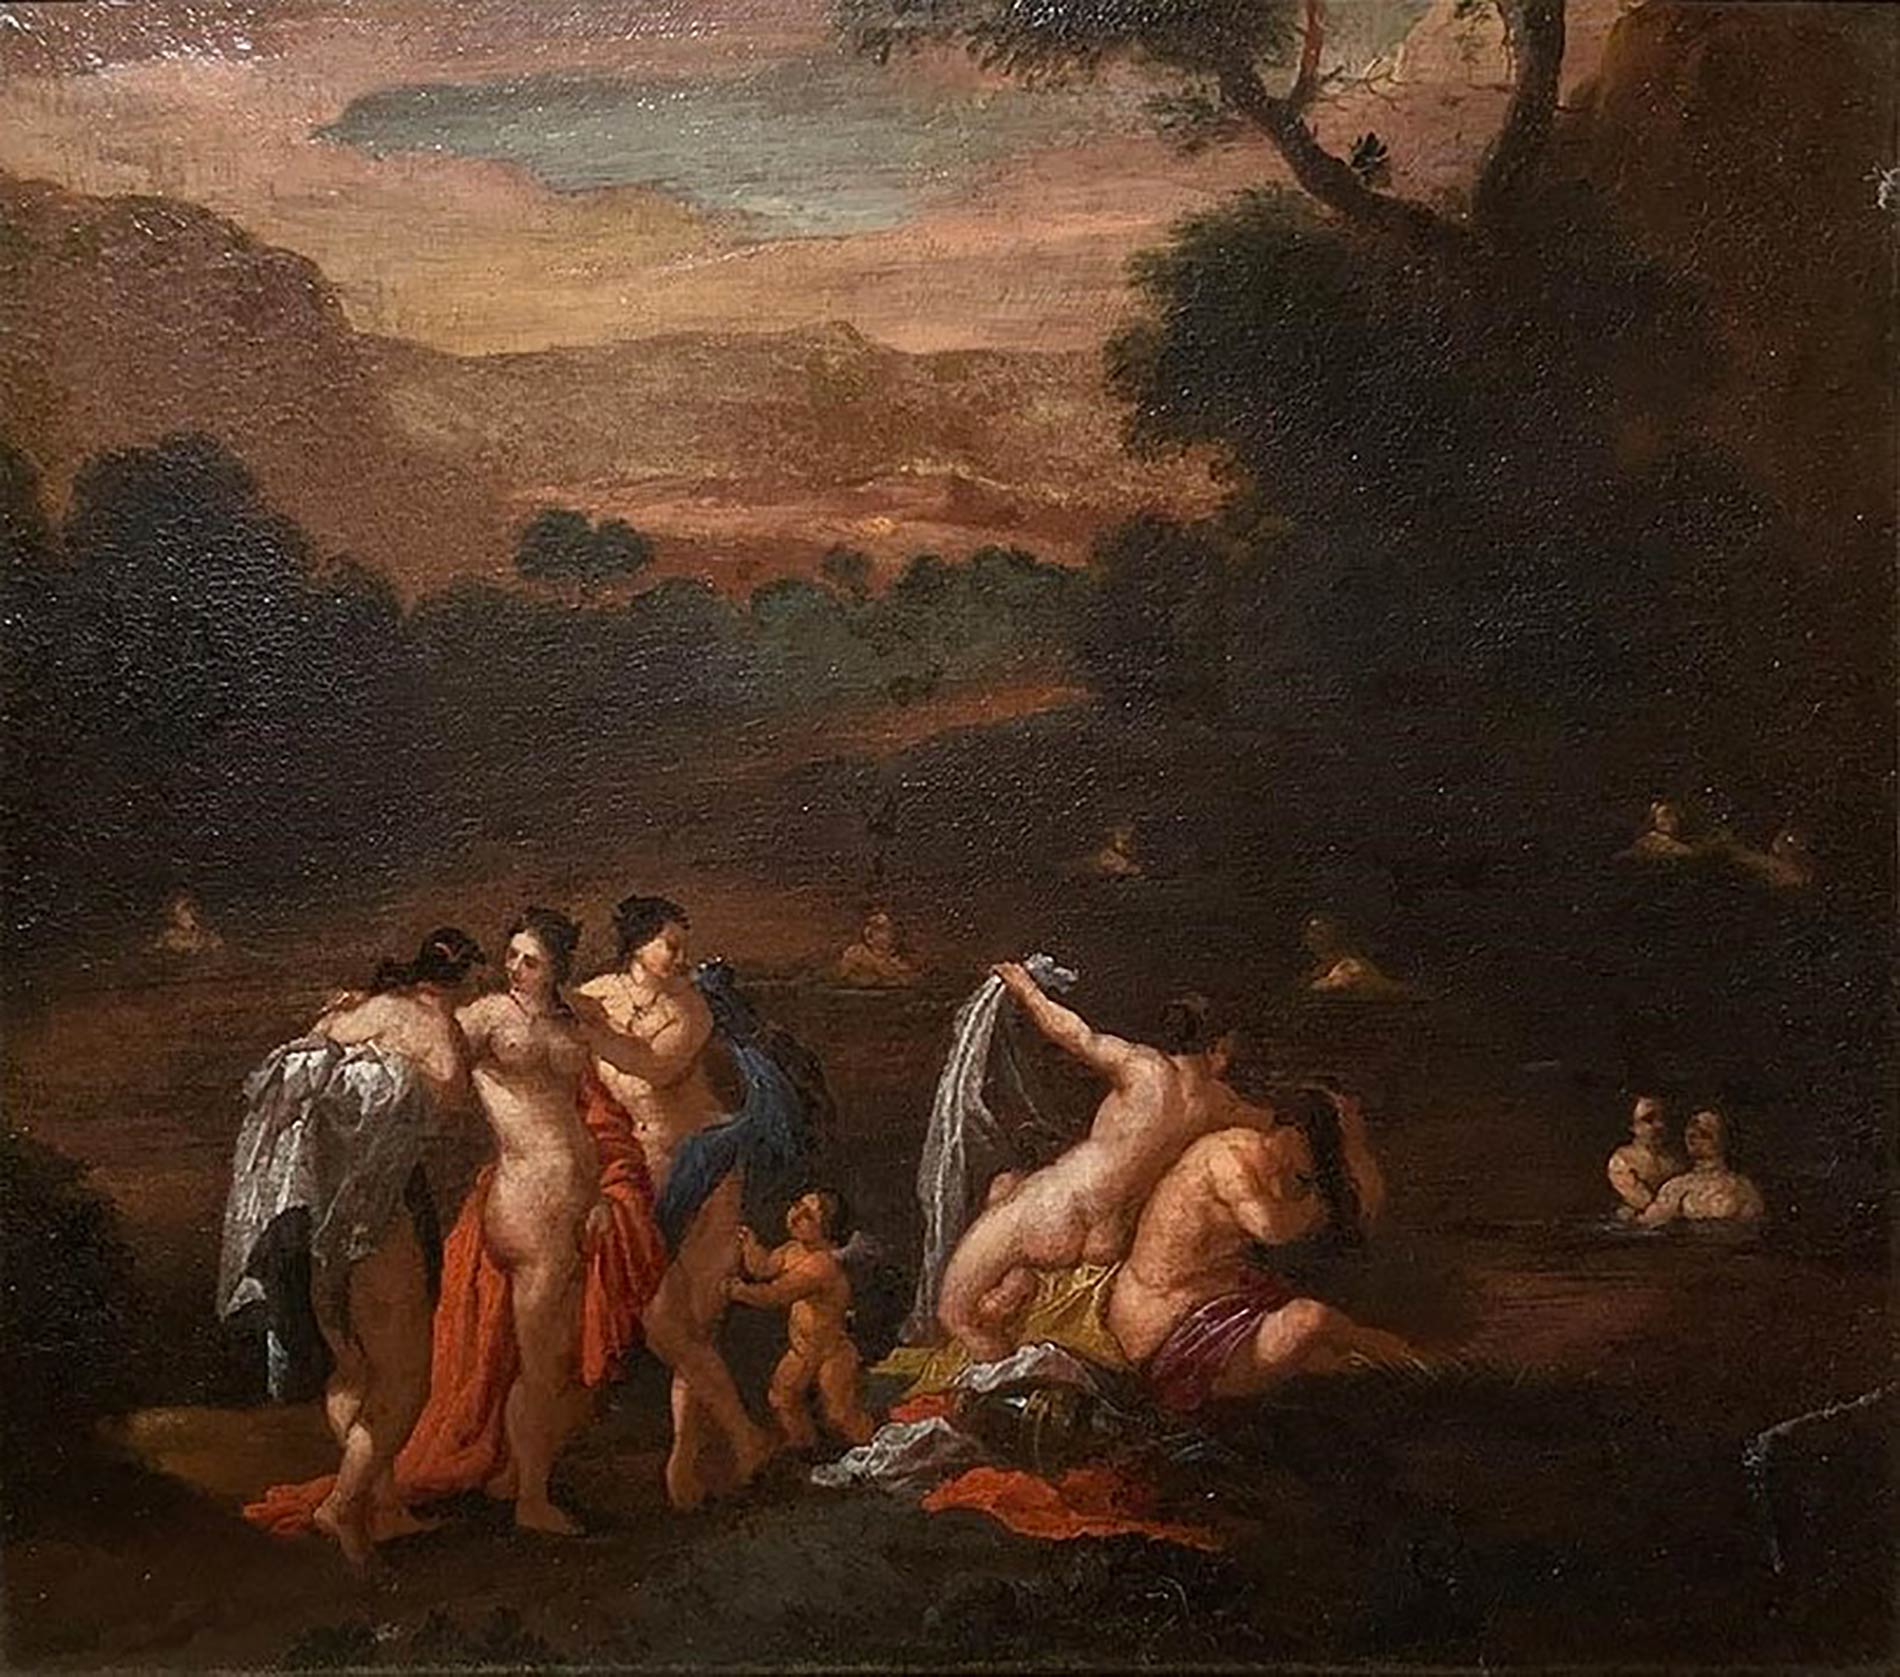 Lorenzo Pasinelli (circle) (Bologna 1629-1700). Diana and her nymphs bathing. 42x48, Oil paint on